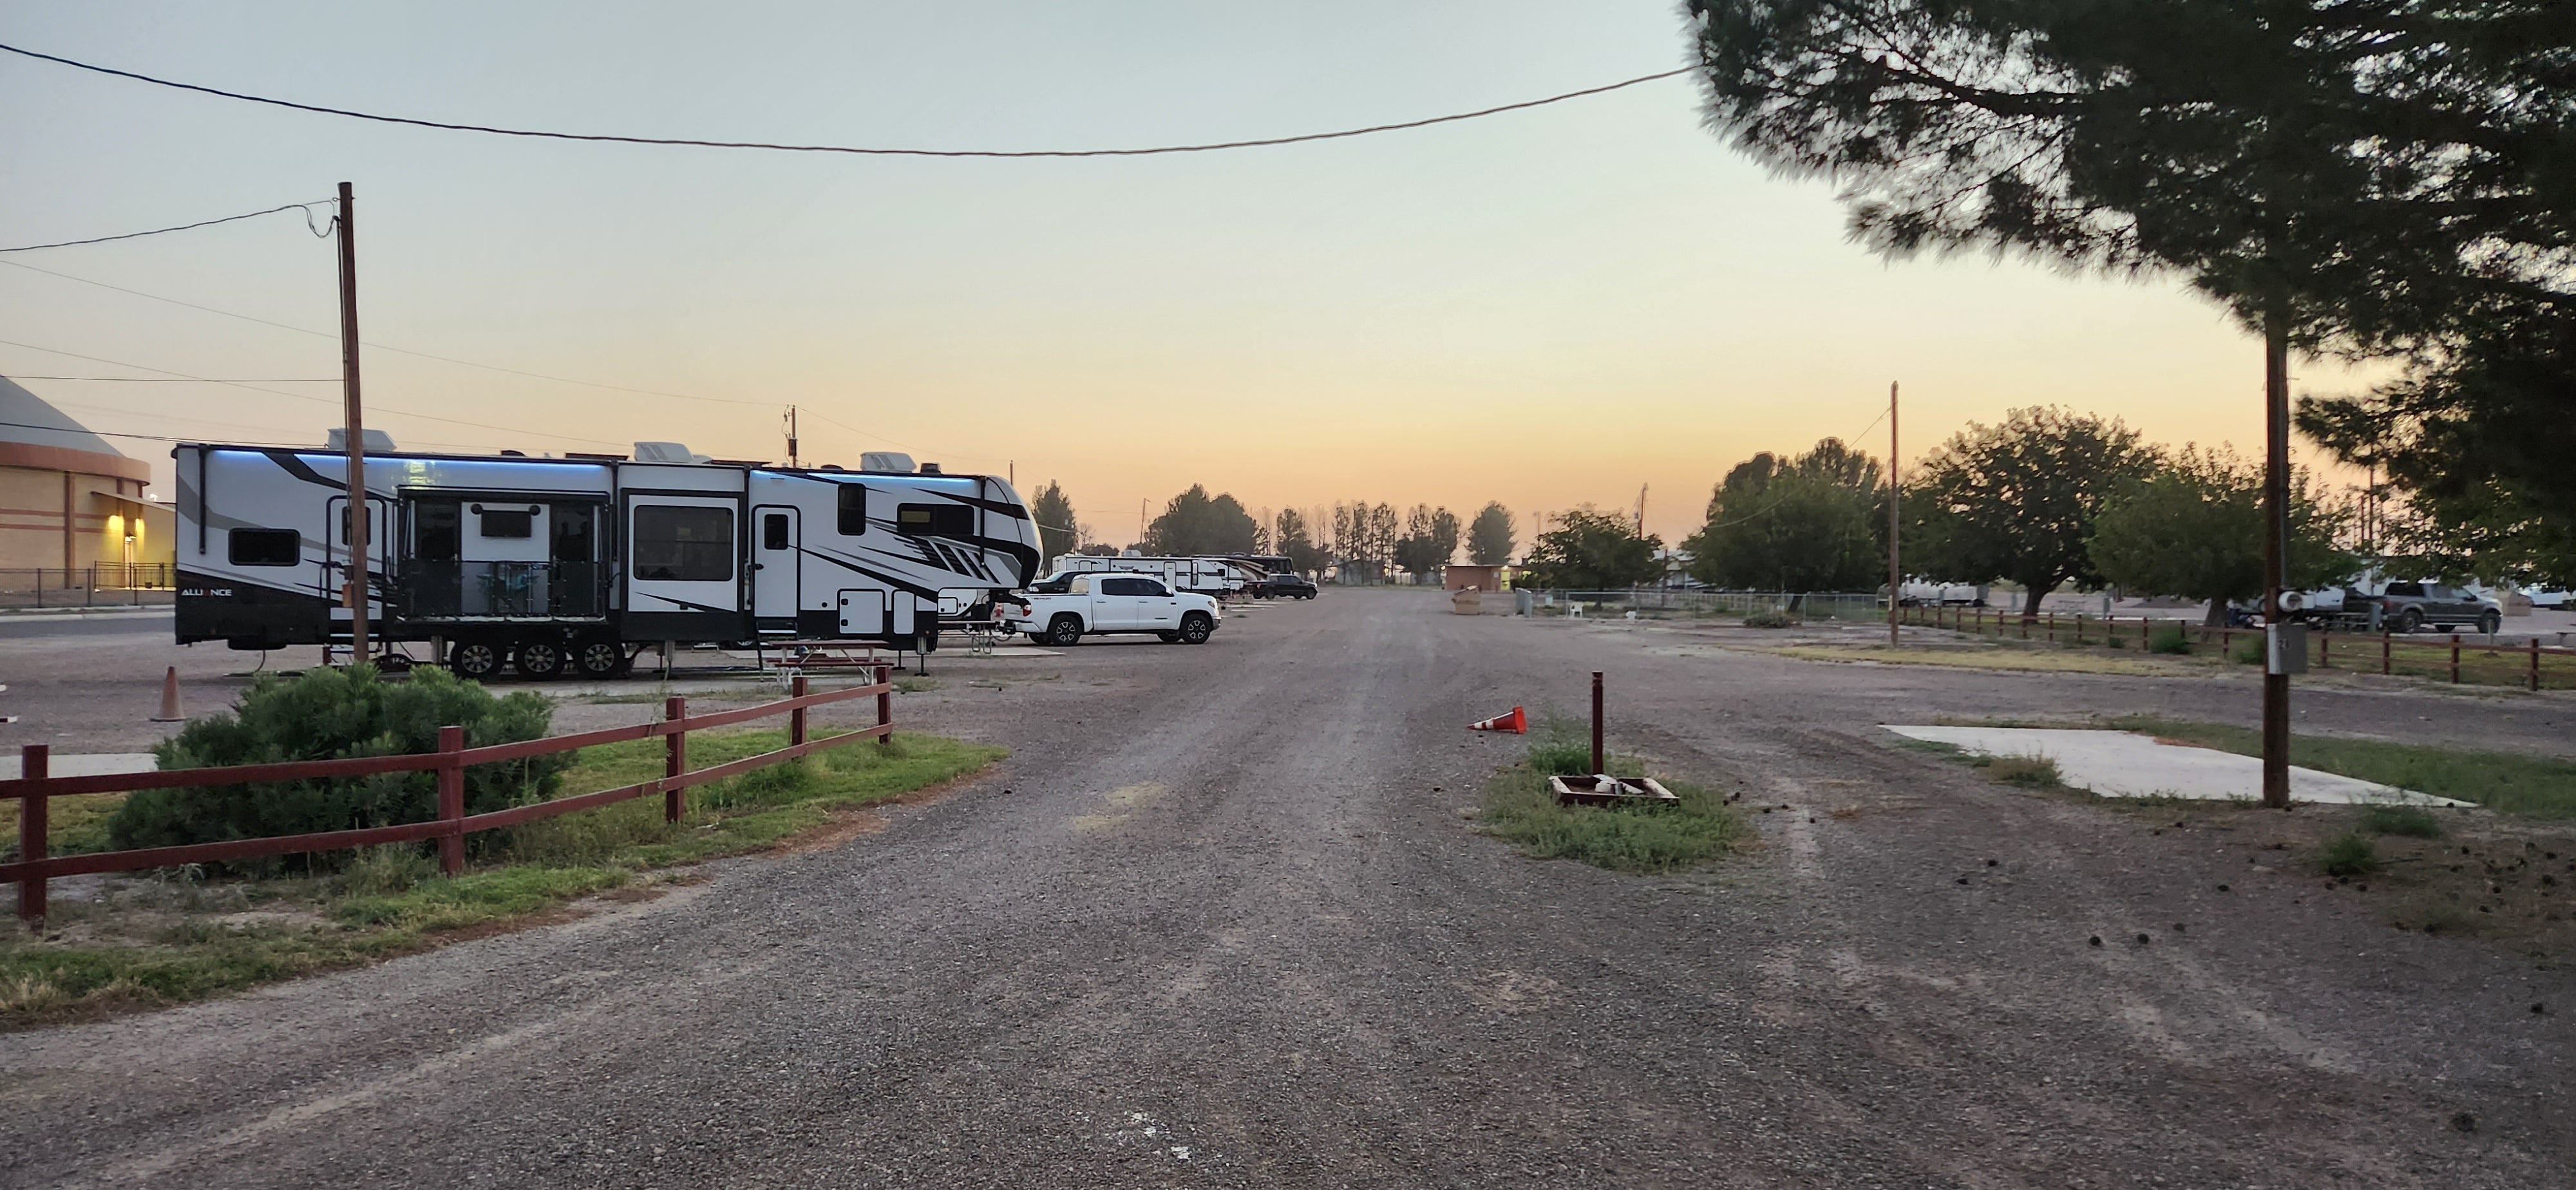 Camper submitted image from Tra-Park RV Park - 2